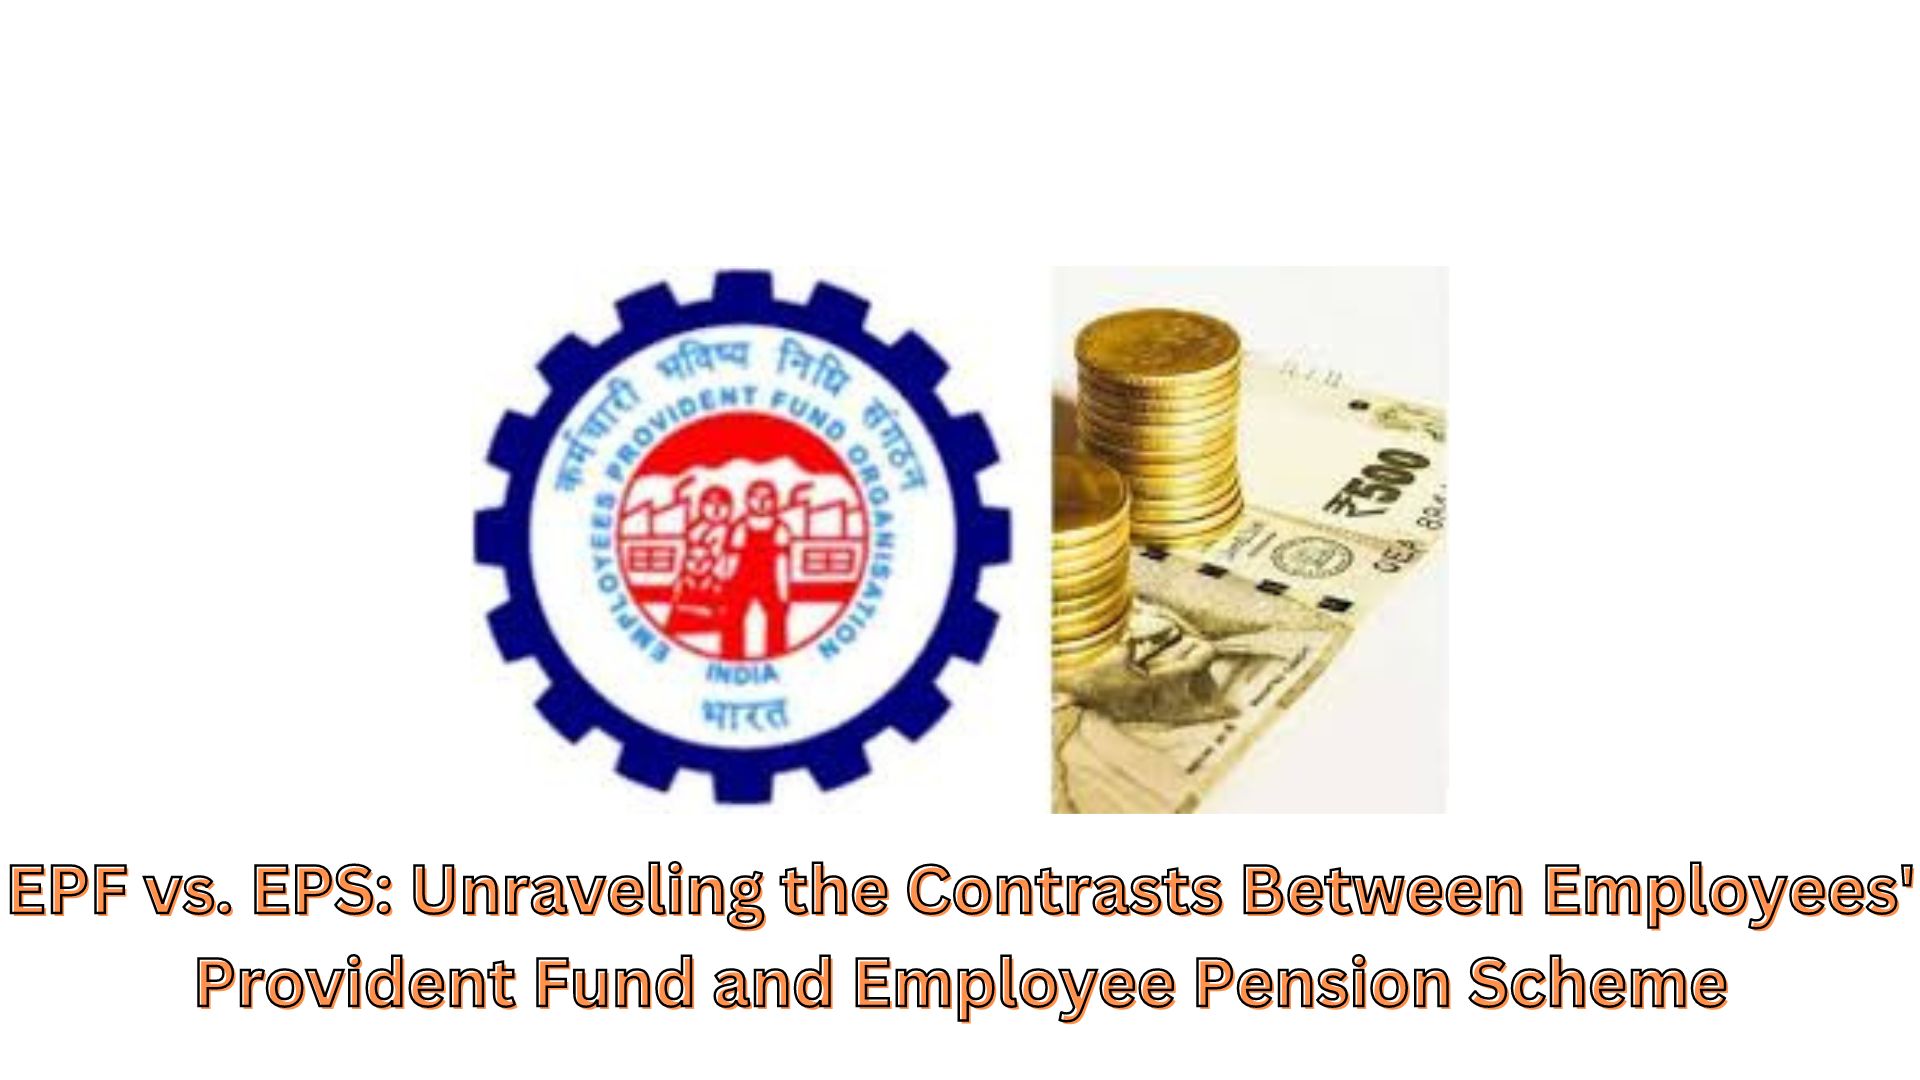 EPF vs. EPS: Unraveling the Contrasts Between Employees' Provident Fund and Employee Pension Scheme